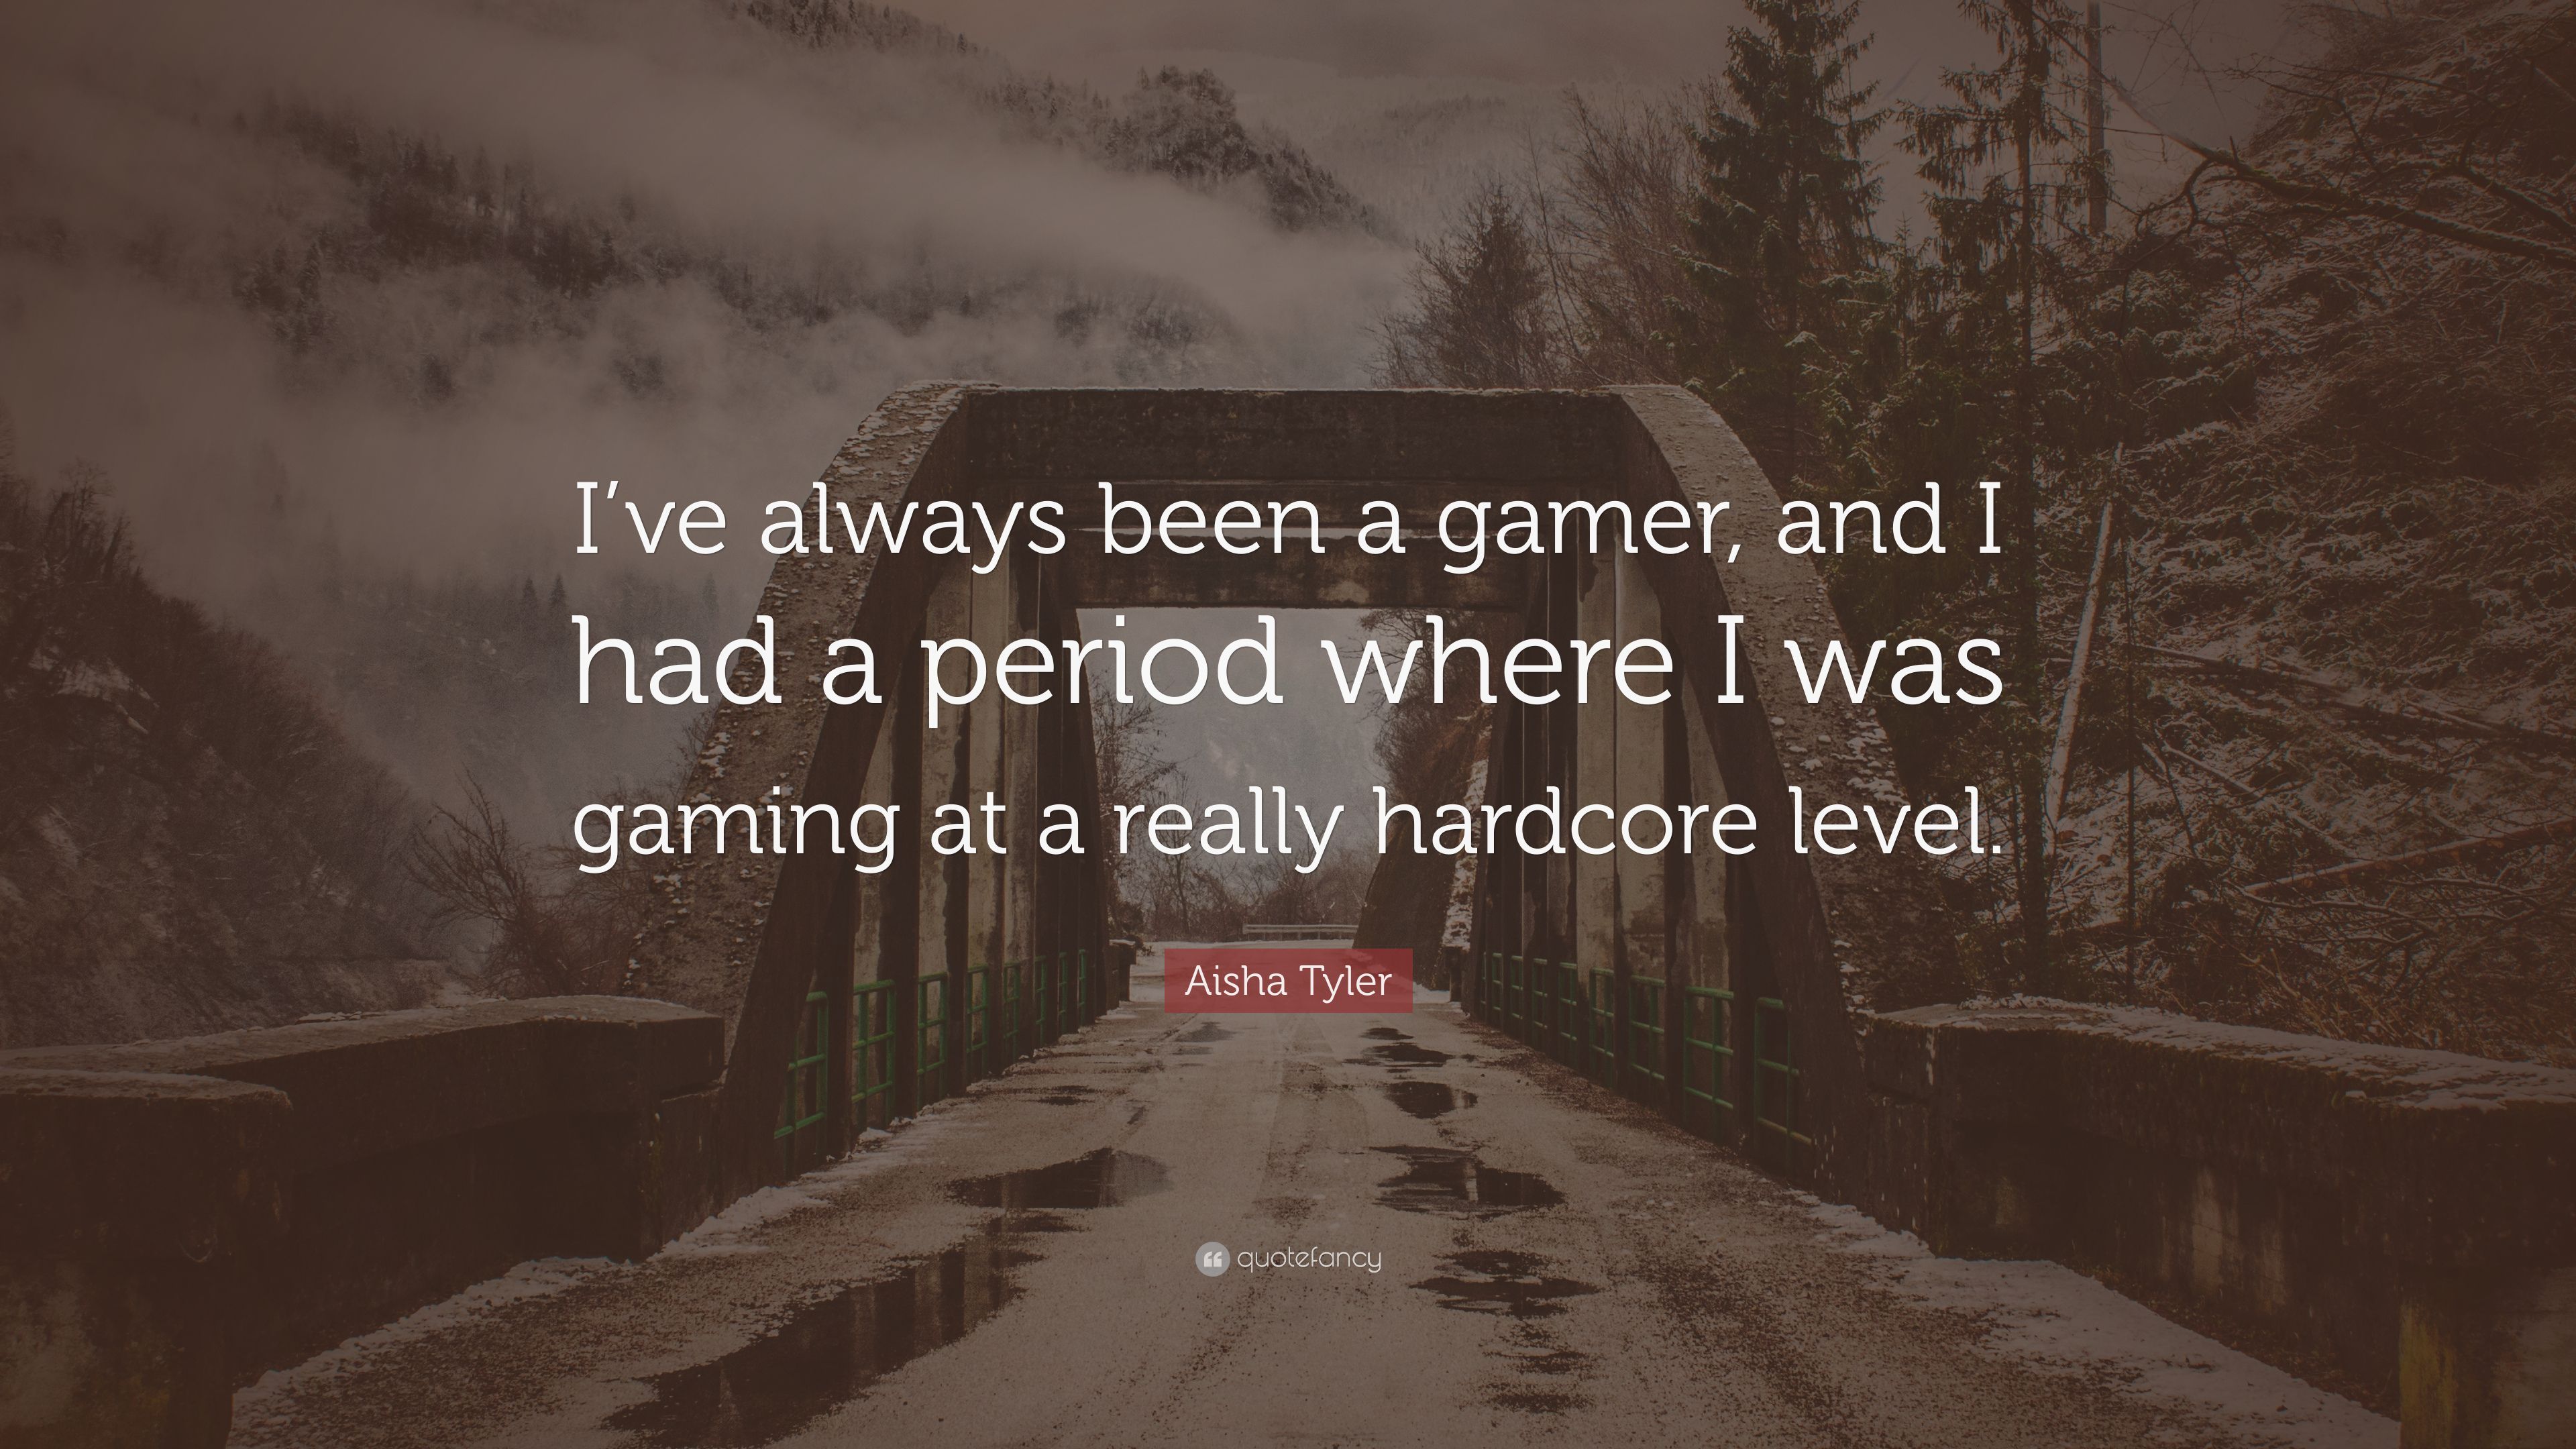 Aisha Tyler Quote: “I've always been a gamer, and I had a period where I was gaming at a really hardcore level.” (7 wallpaper)